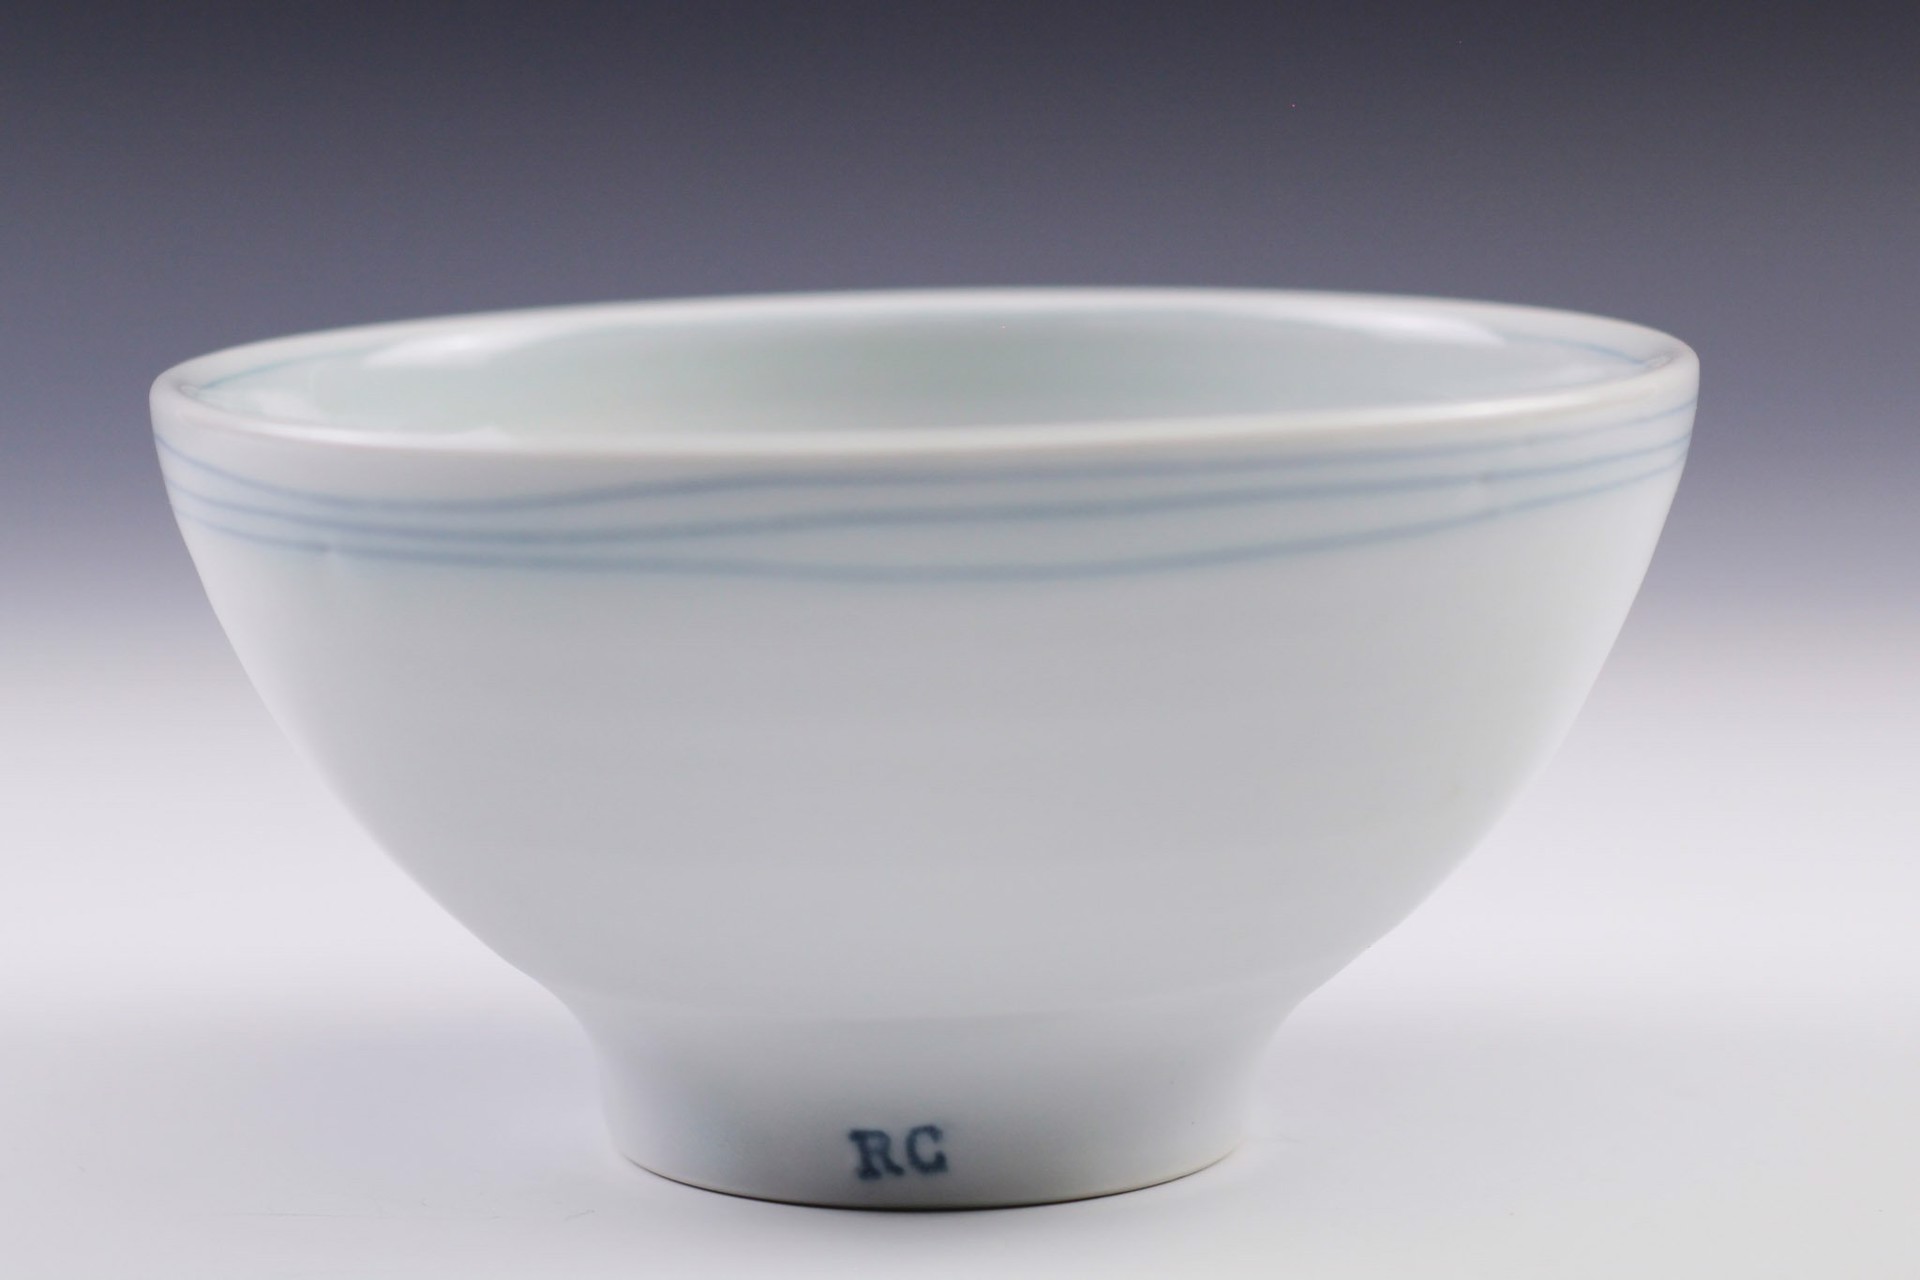 Cereal Bowl by Rob Cartelli